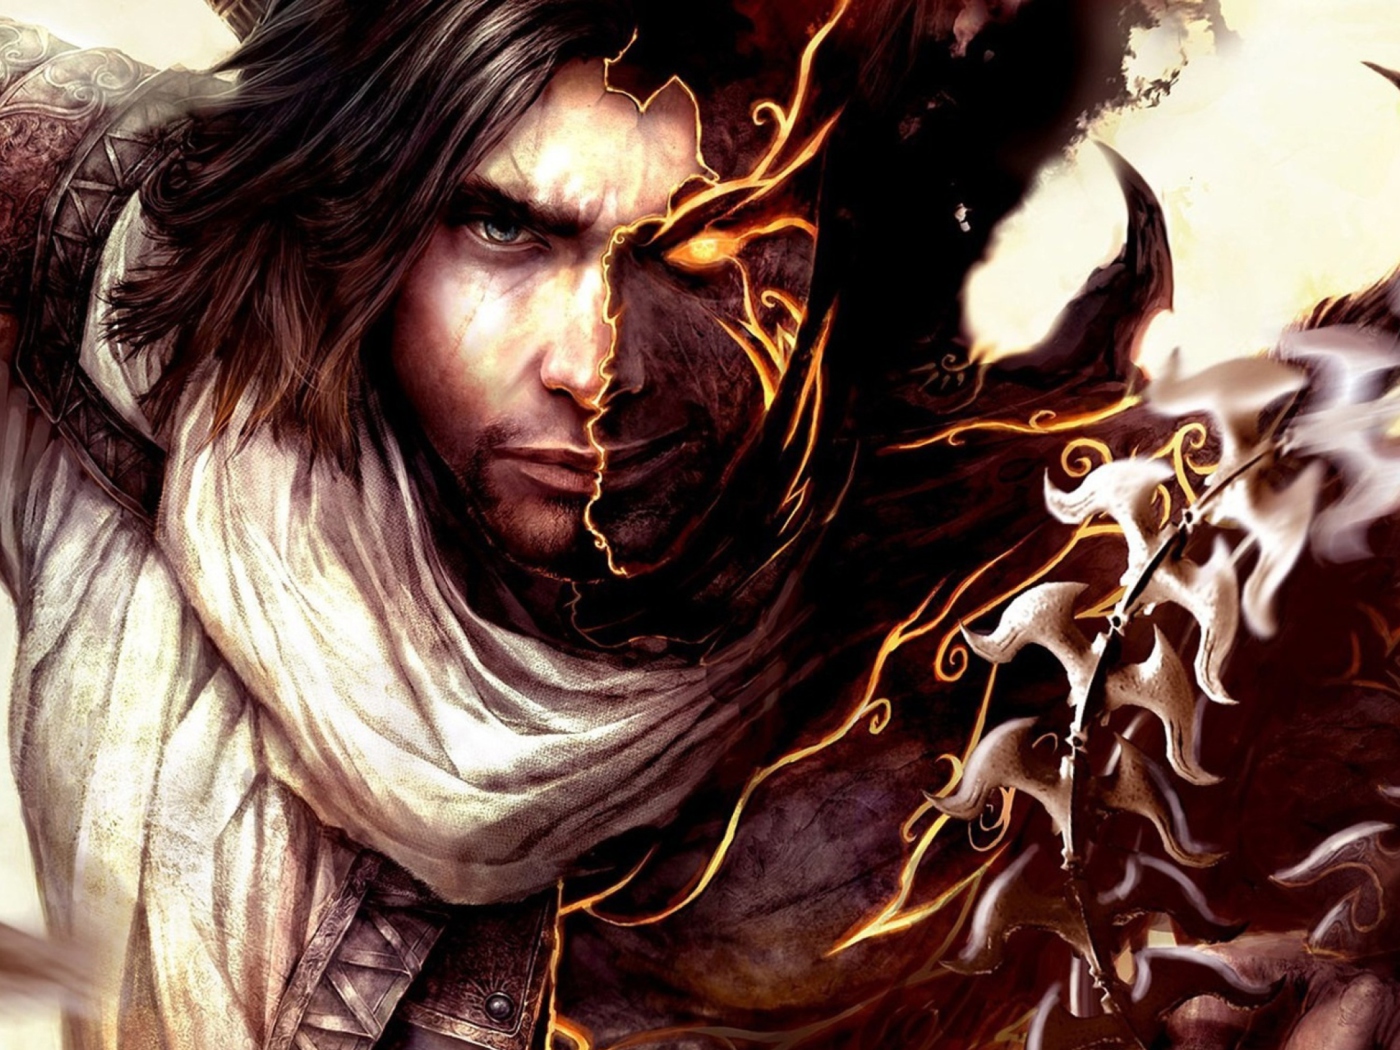 Prince Of Persia - The Two Thrones wallpaper 1400x1050